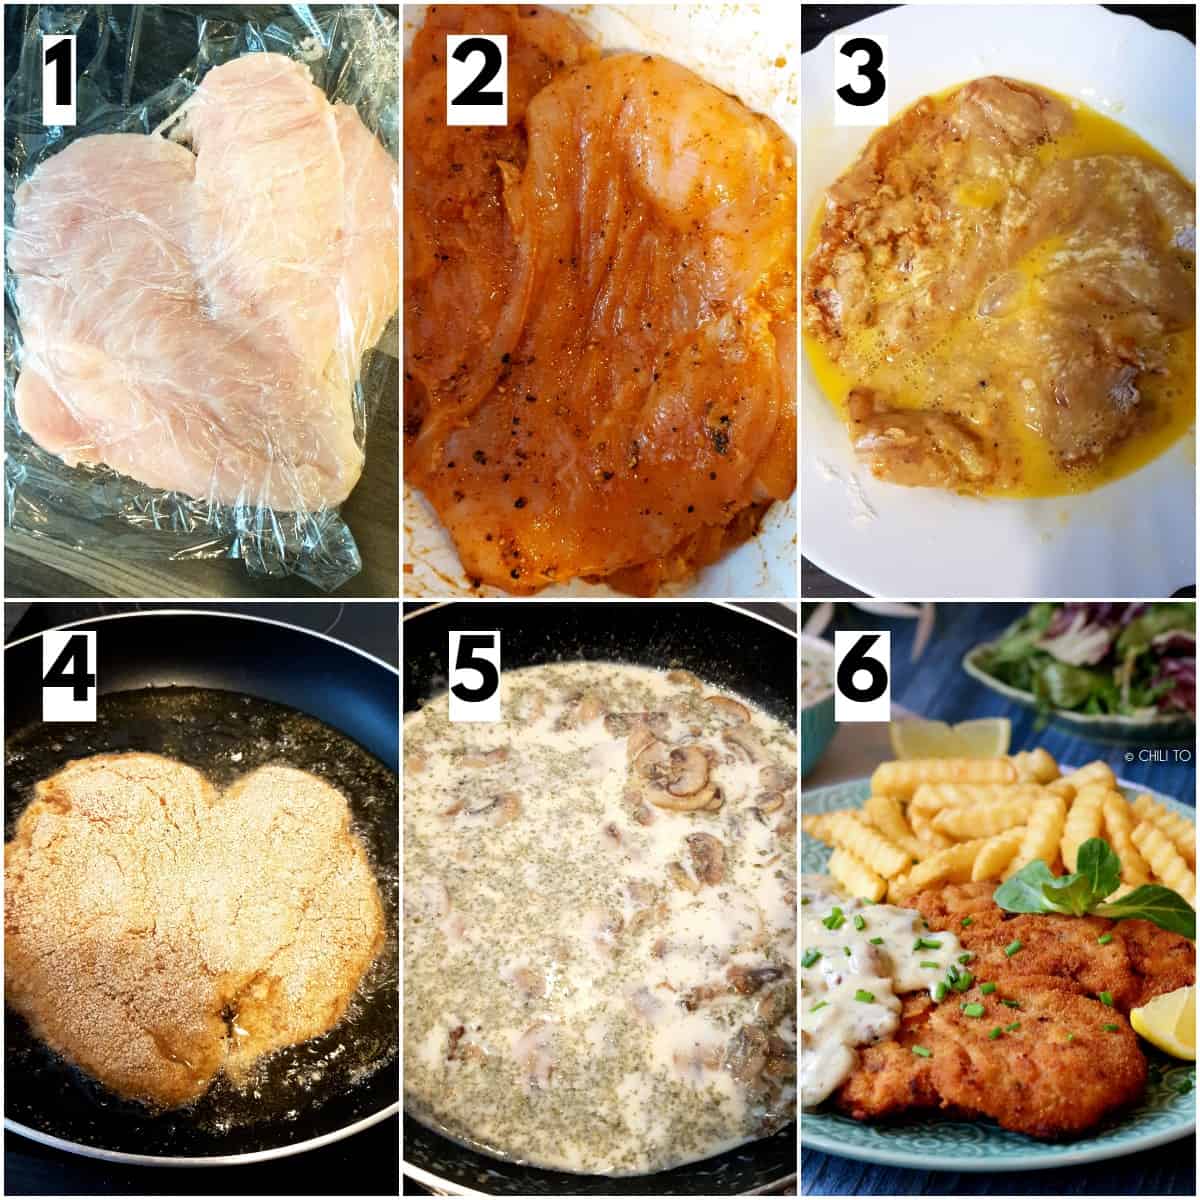 Step by step instruction son how to make chicken schnitzel with mushroom sauce.